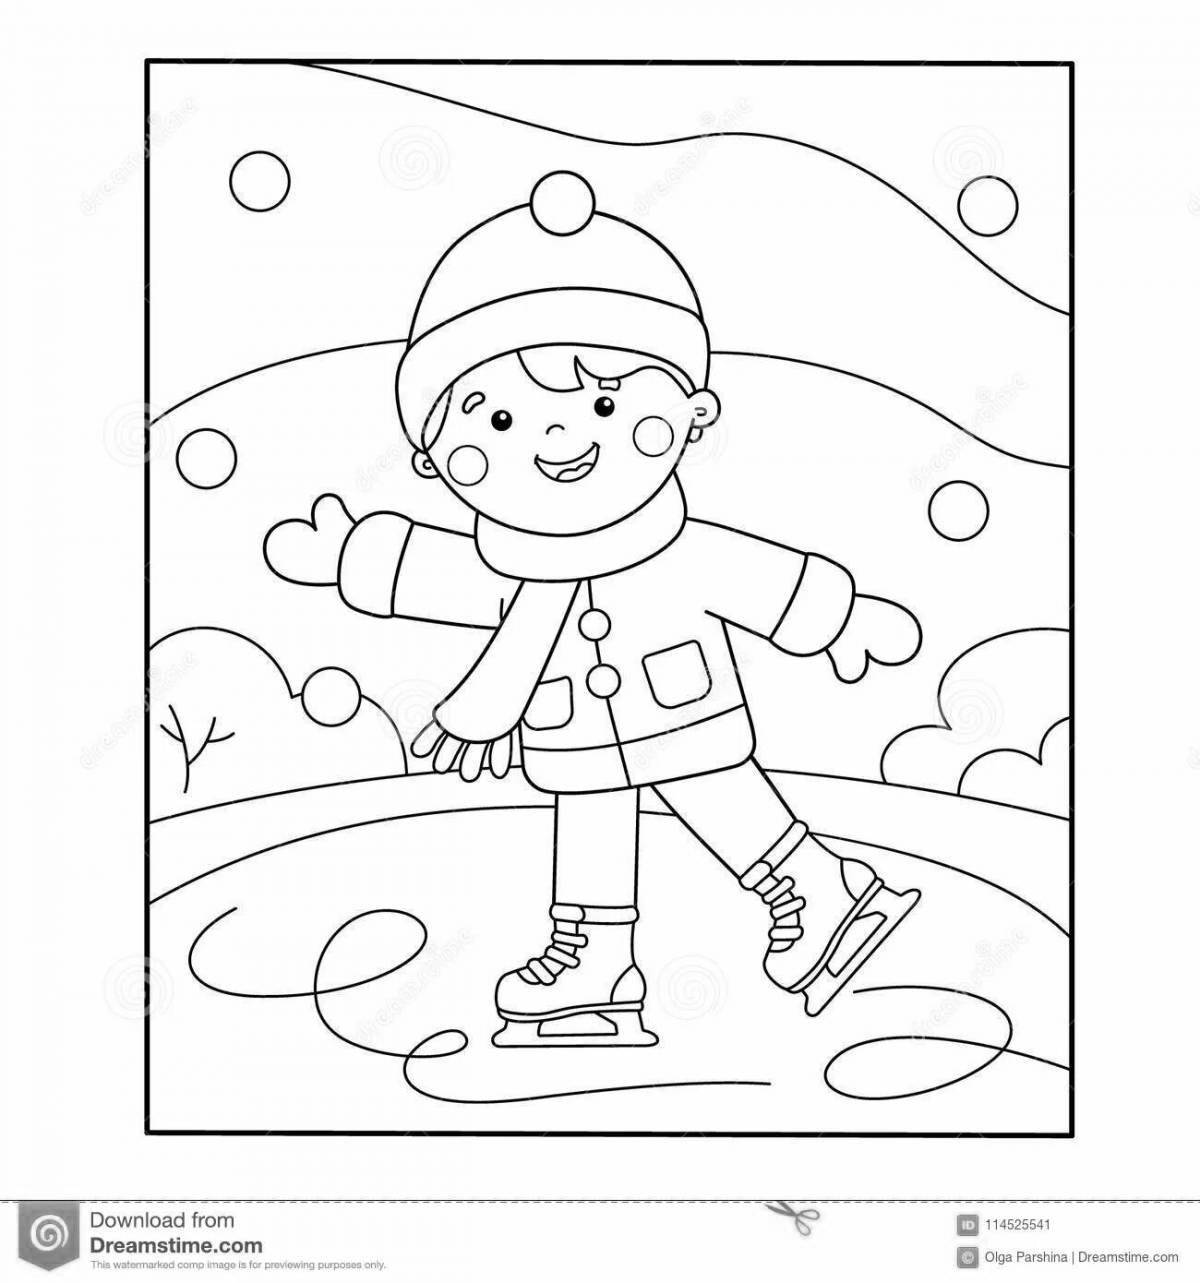 Fantastic sports coloring book for 4-5 year olds